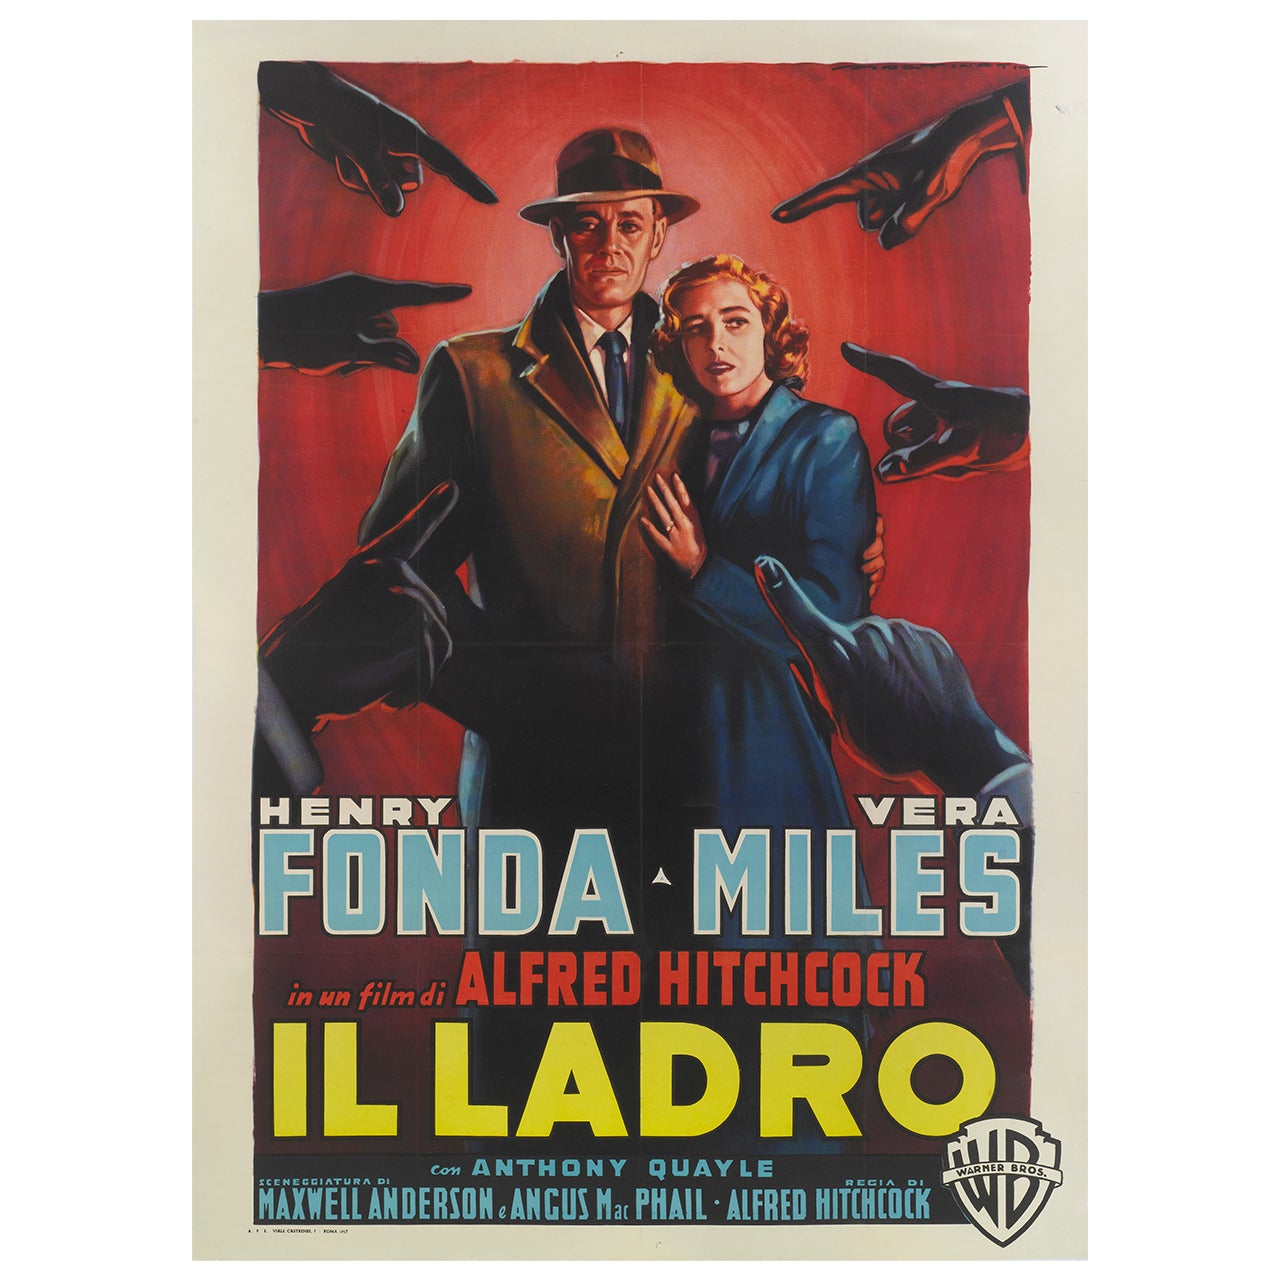 "Wrong Man" or "Il Ladro" Film Poster